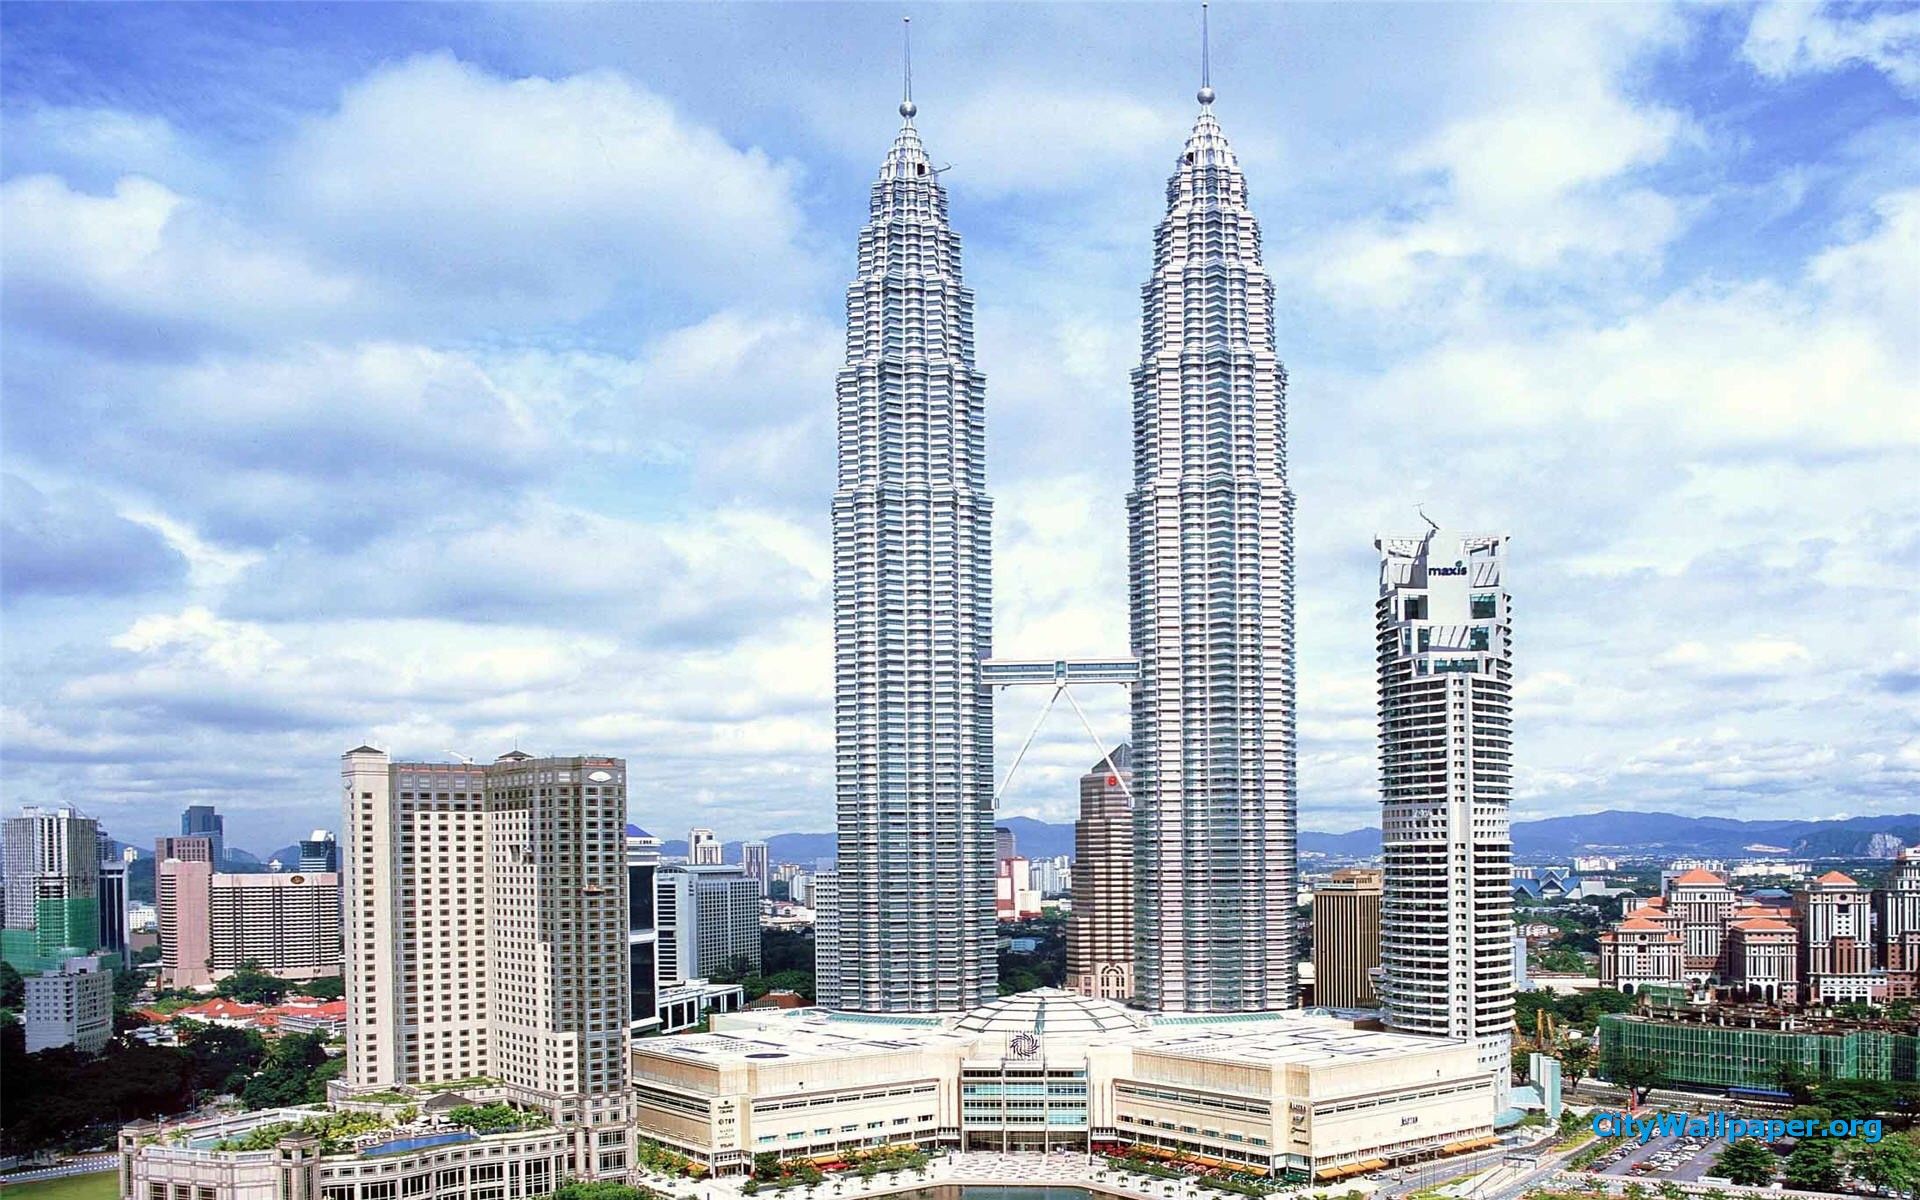 petronas towers - Google Search | GRDS285 Project C | Pinterest | Towers